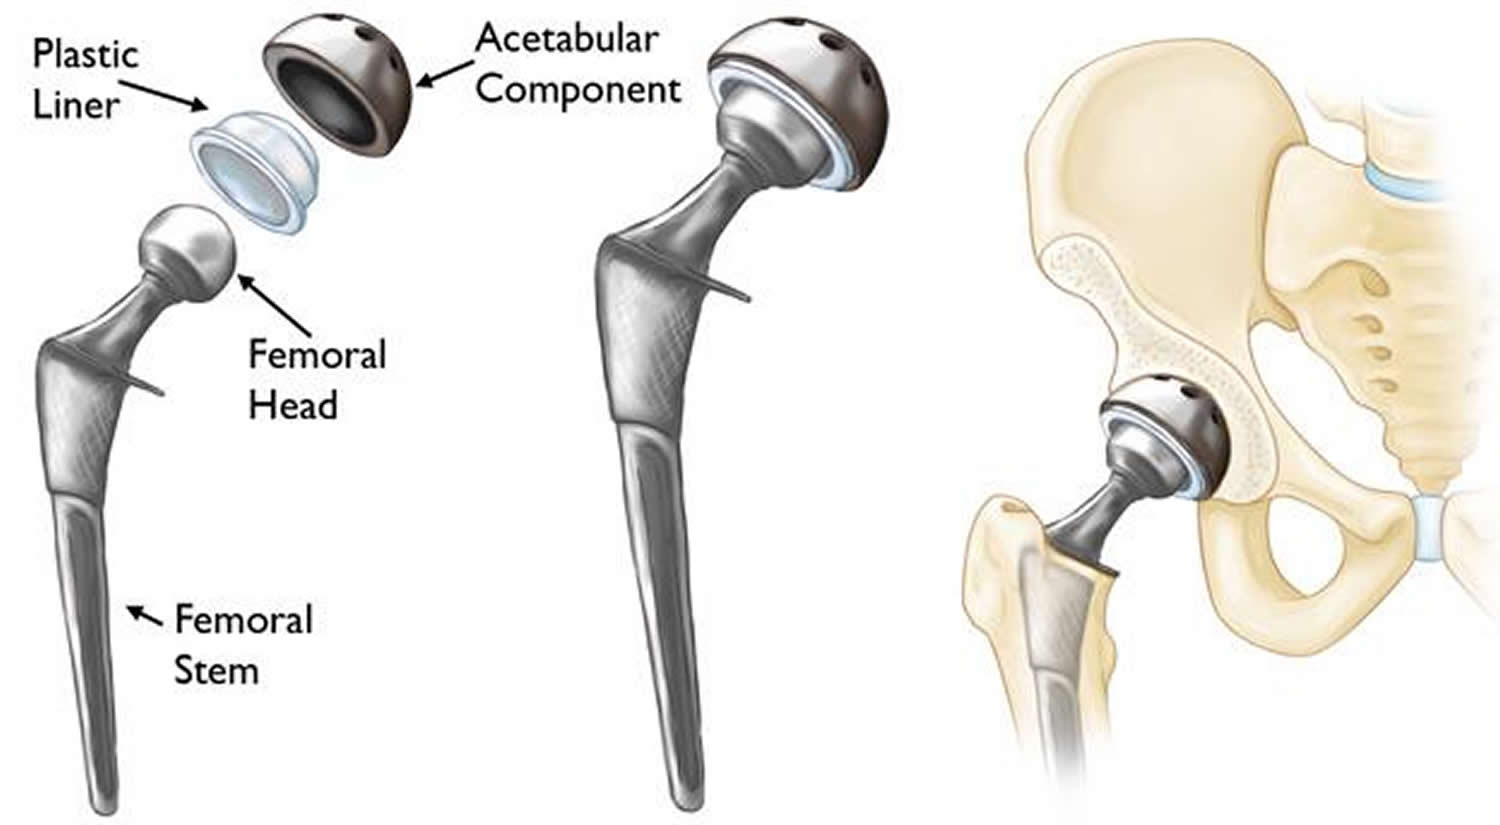 Hip Replacement Surgery Recovery Time, Alternatives, Risks